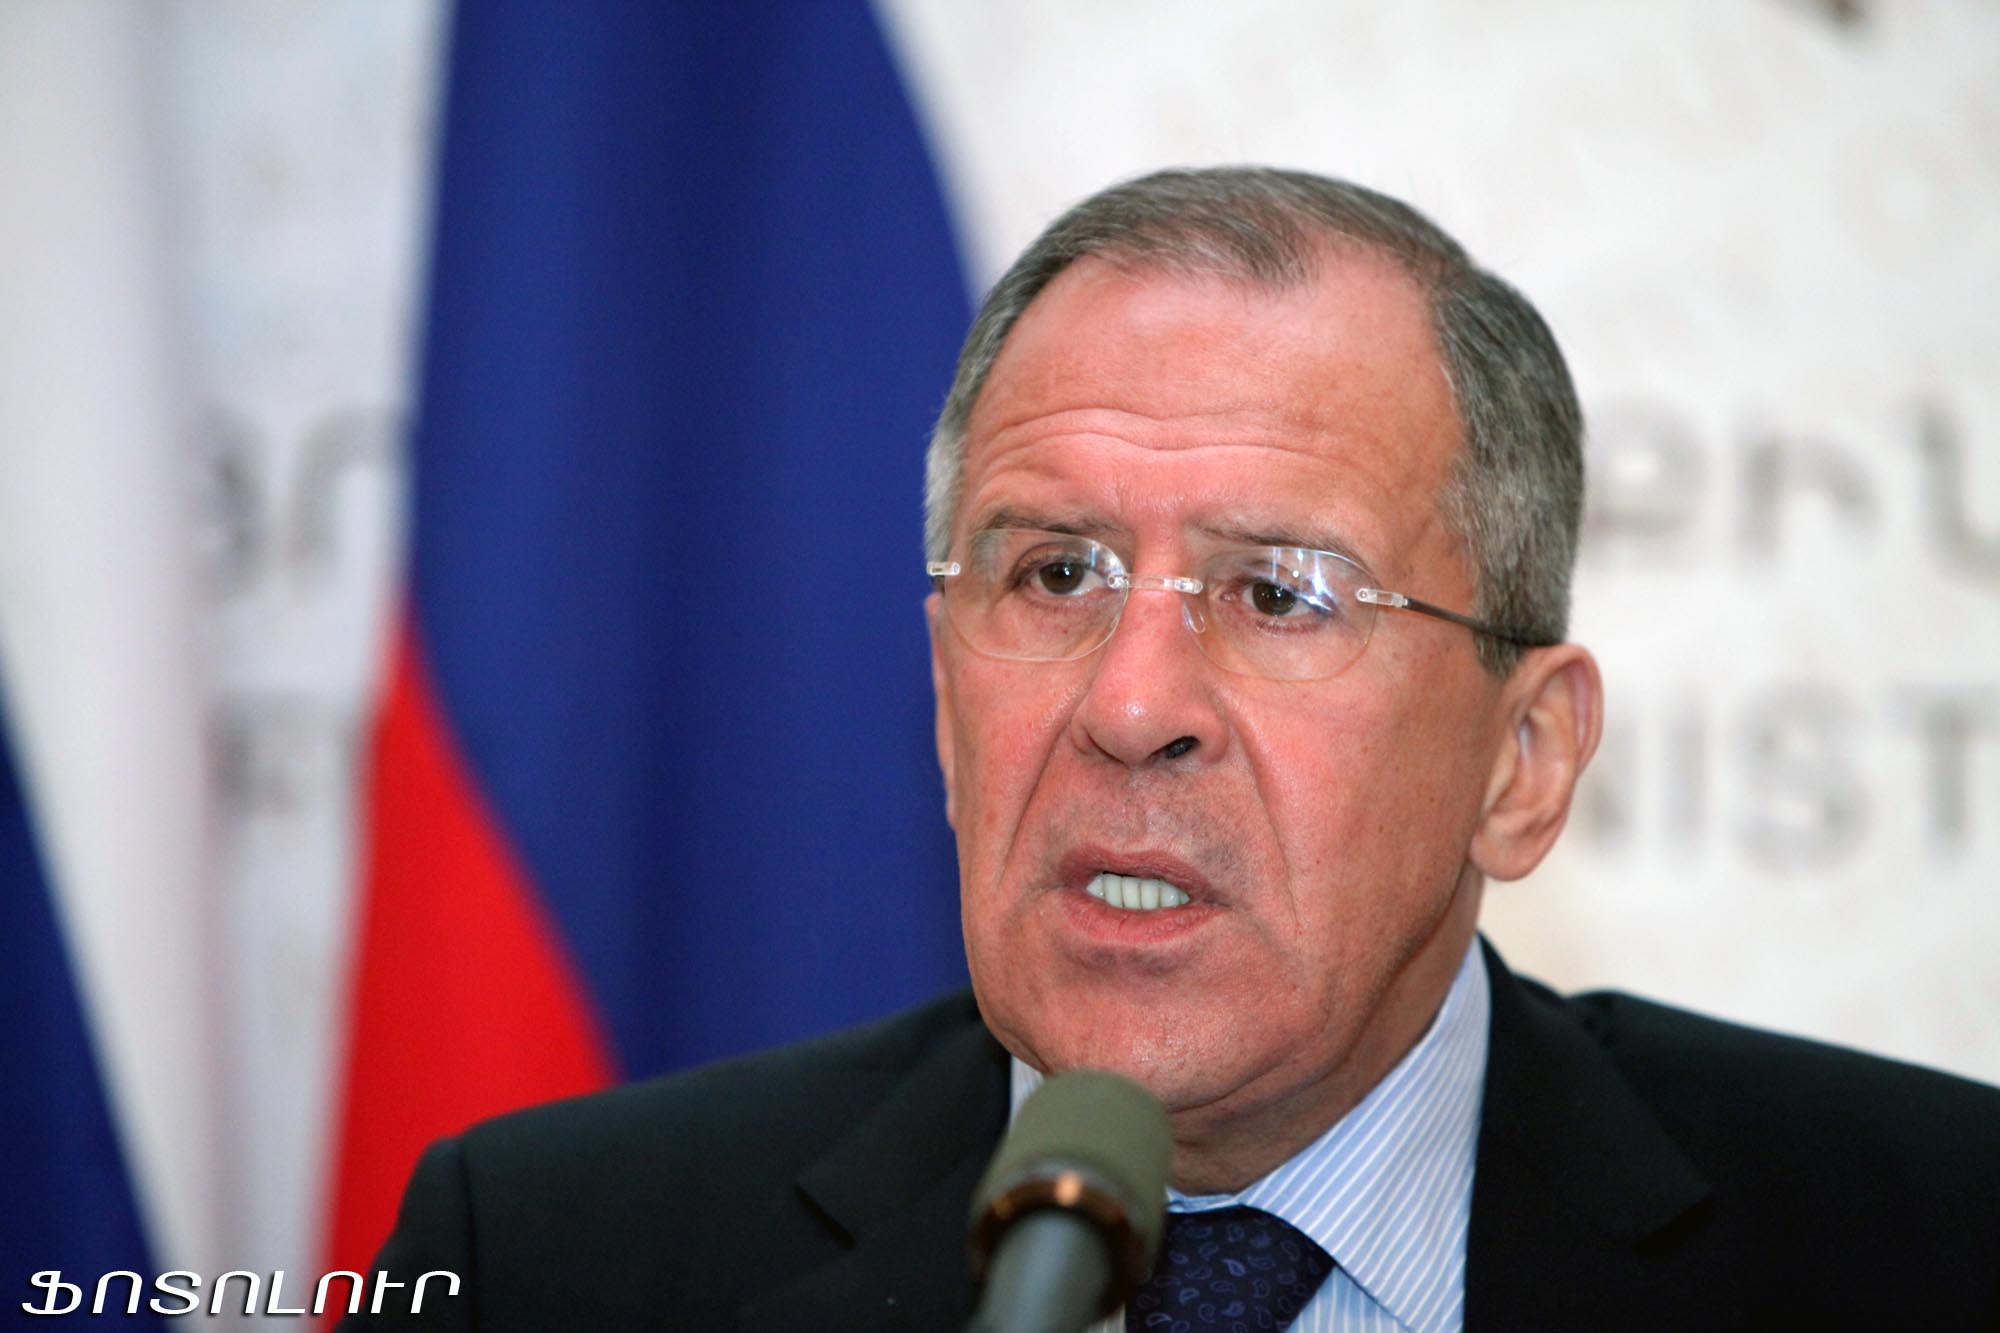 Russia reedy to help Armenia and Azerbaijan with border delimitation and demarcation – Lavrov